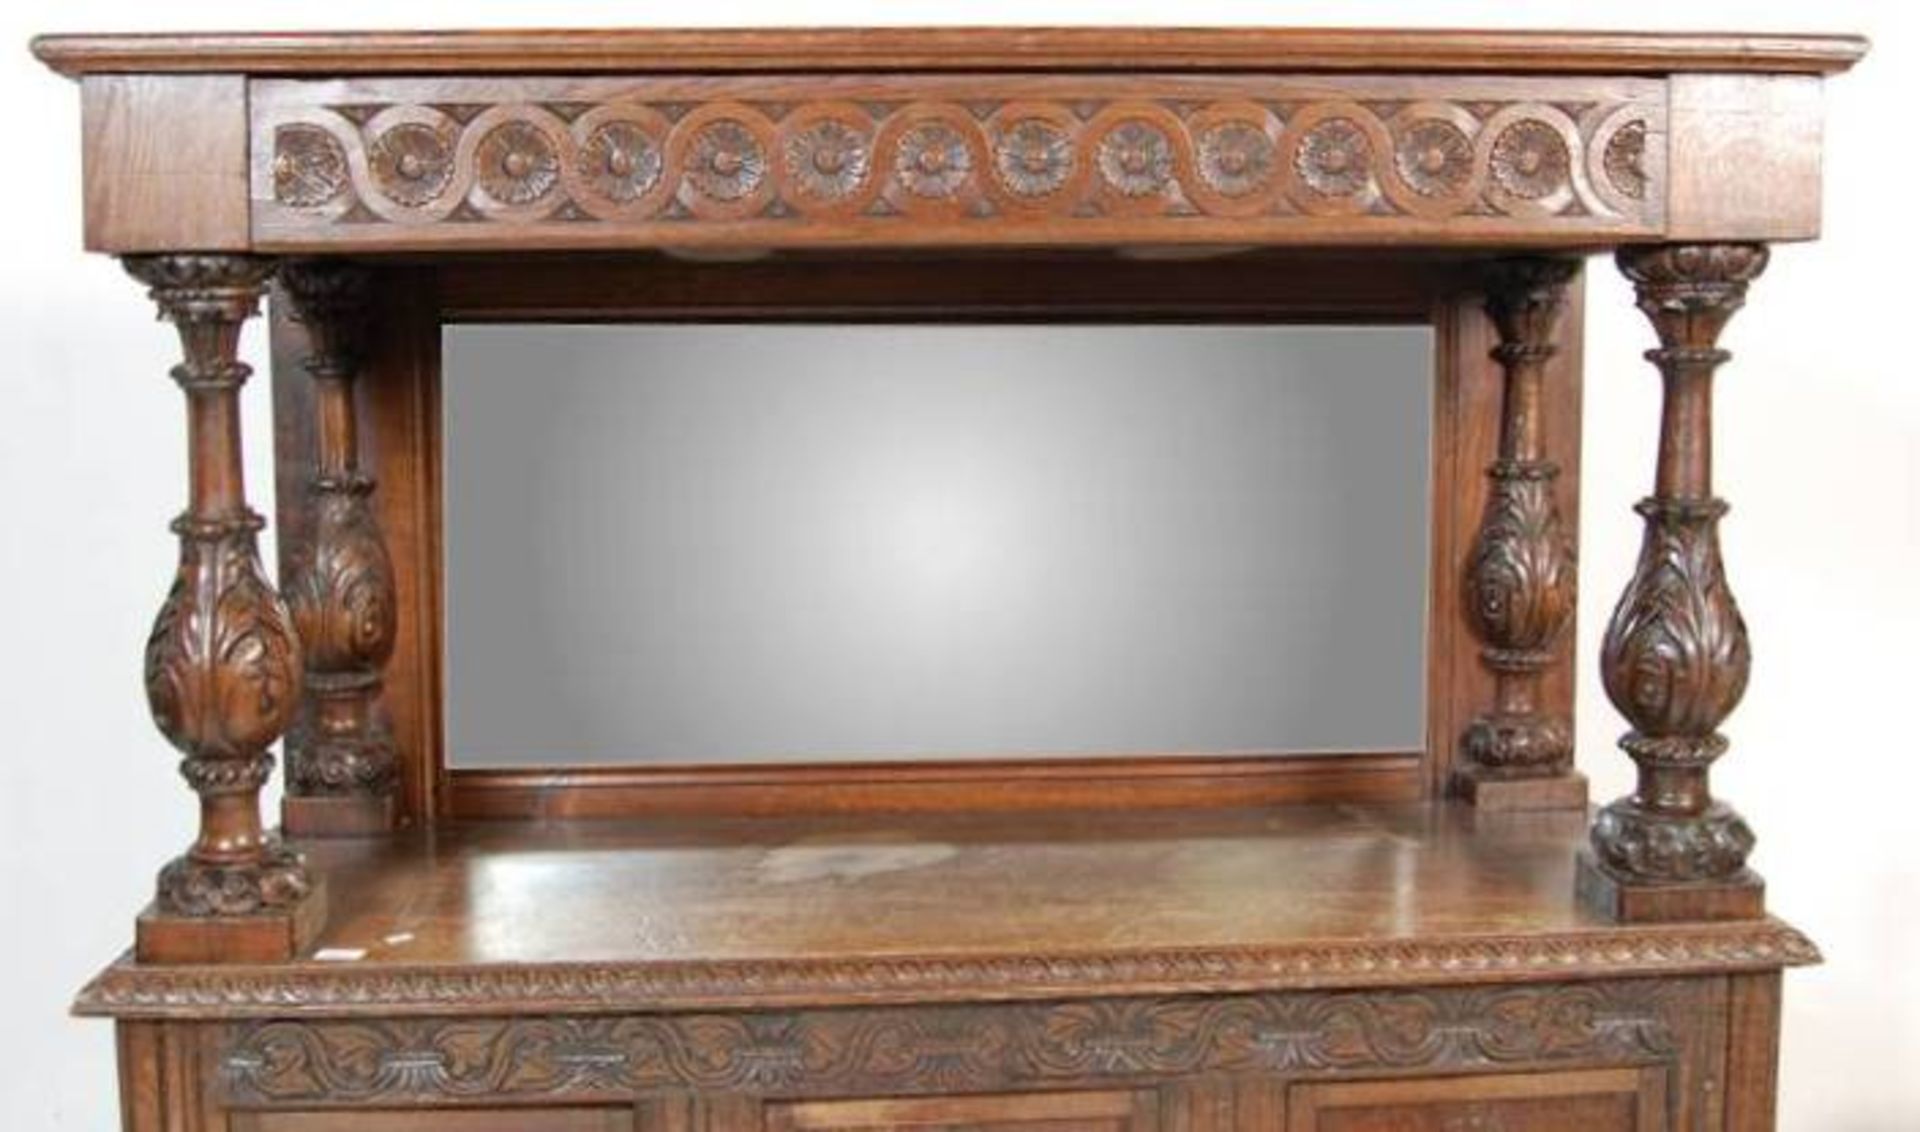 LATE VICTORIAN EARLY 20TH CENTURY MIRROR BACK OAK COURT CUPBOARD - Image 4 of 10